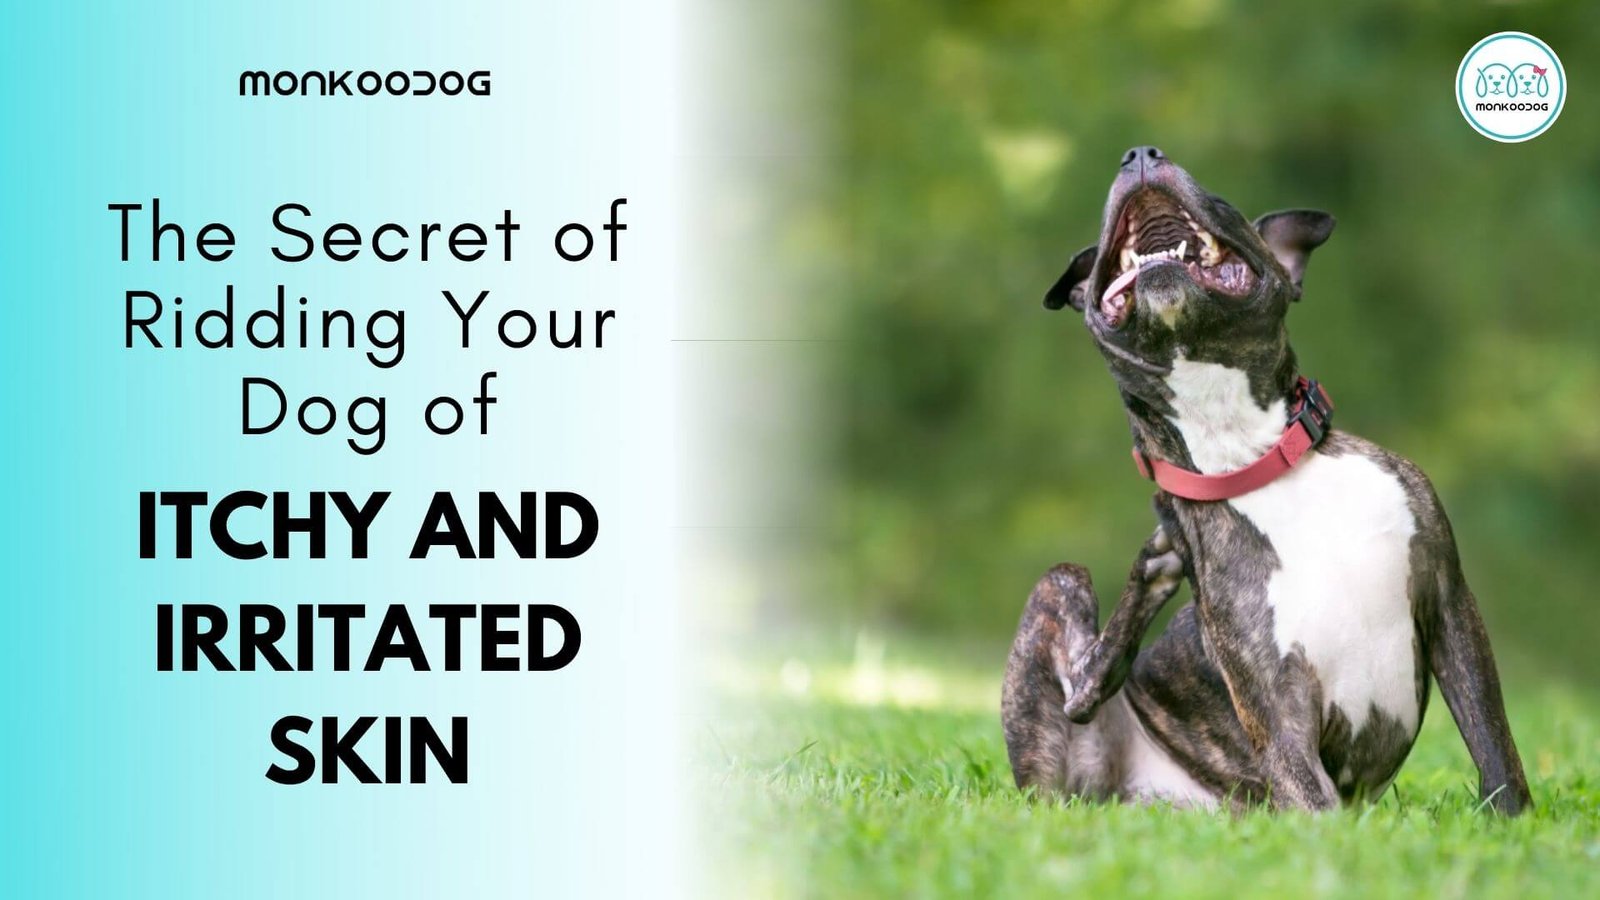 The Secret of Ridding Your Dog of itchy and irritated skin